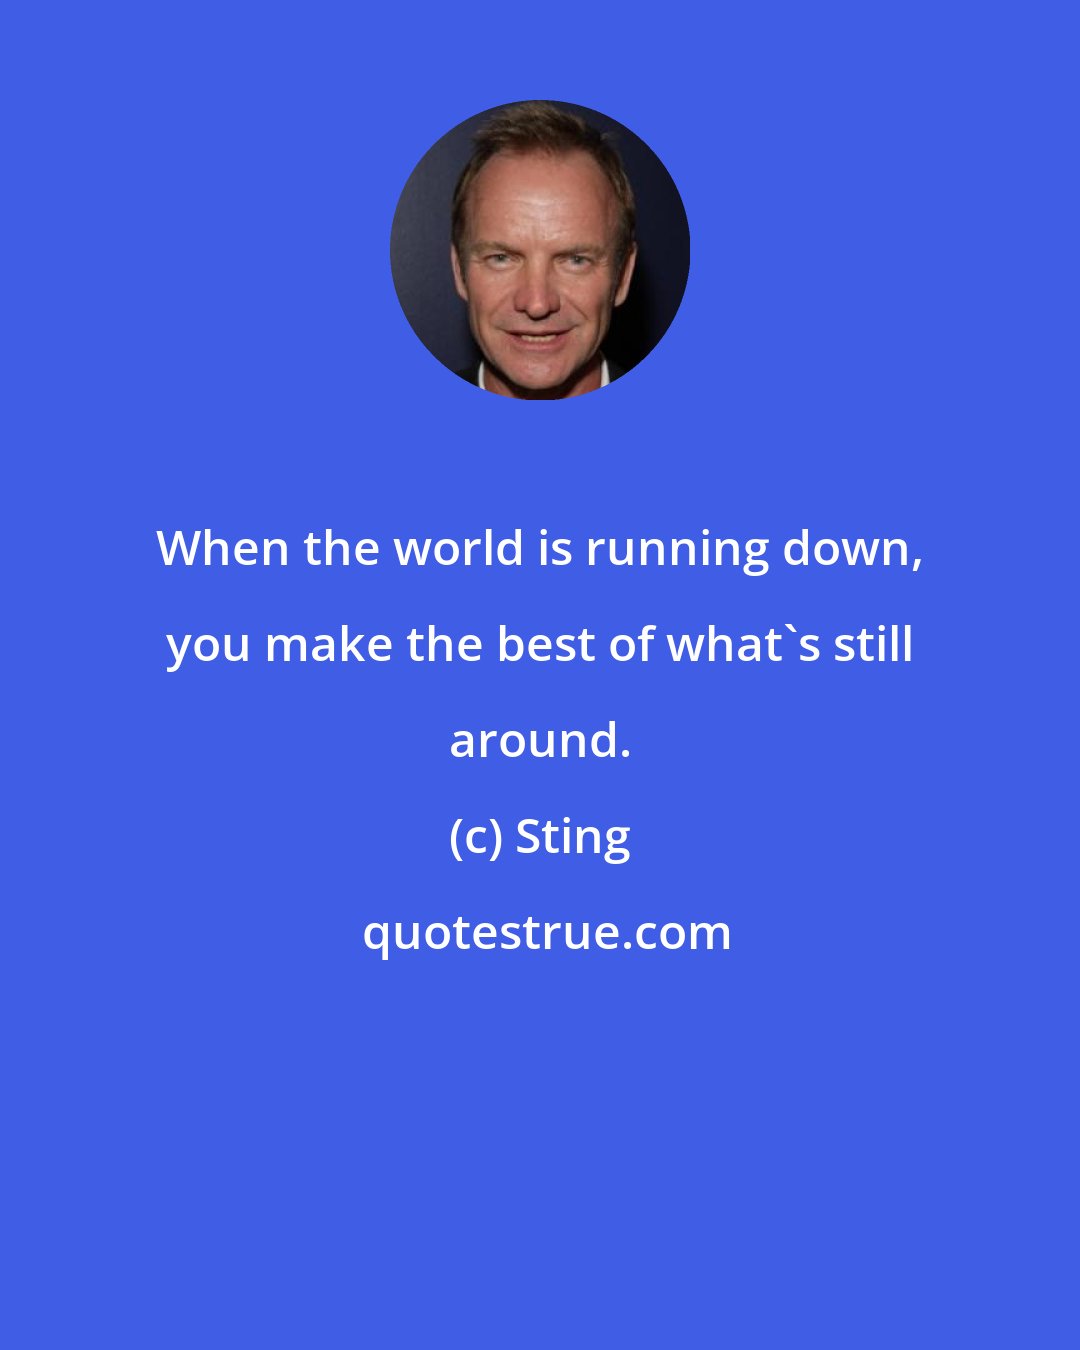 Sting: When the world is running down, you make the best of what's still around.